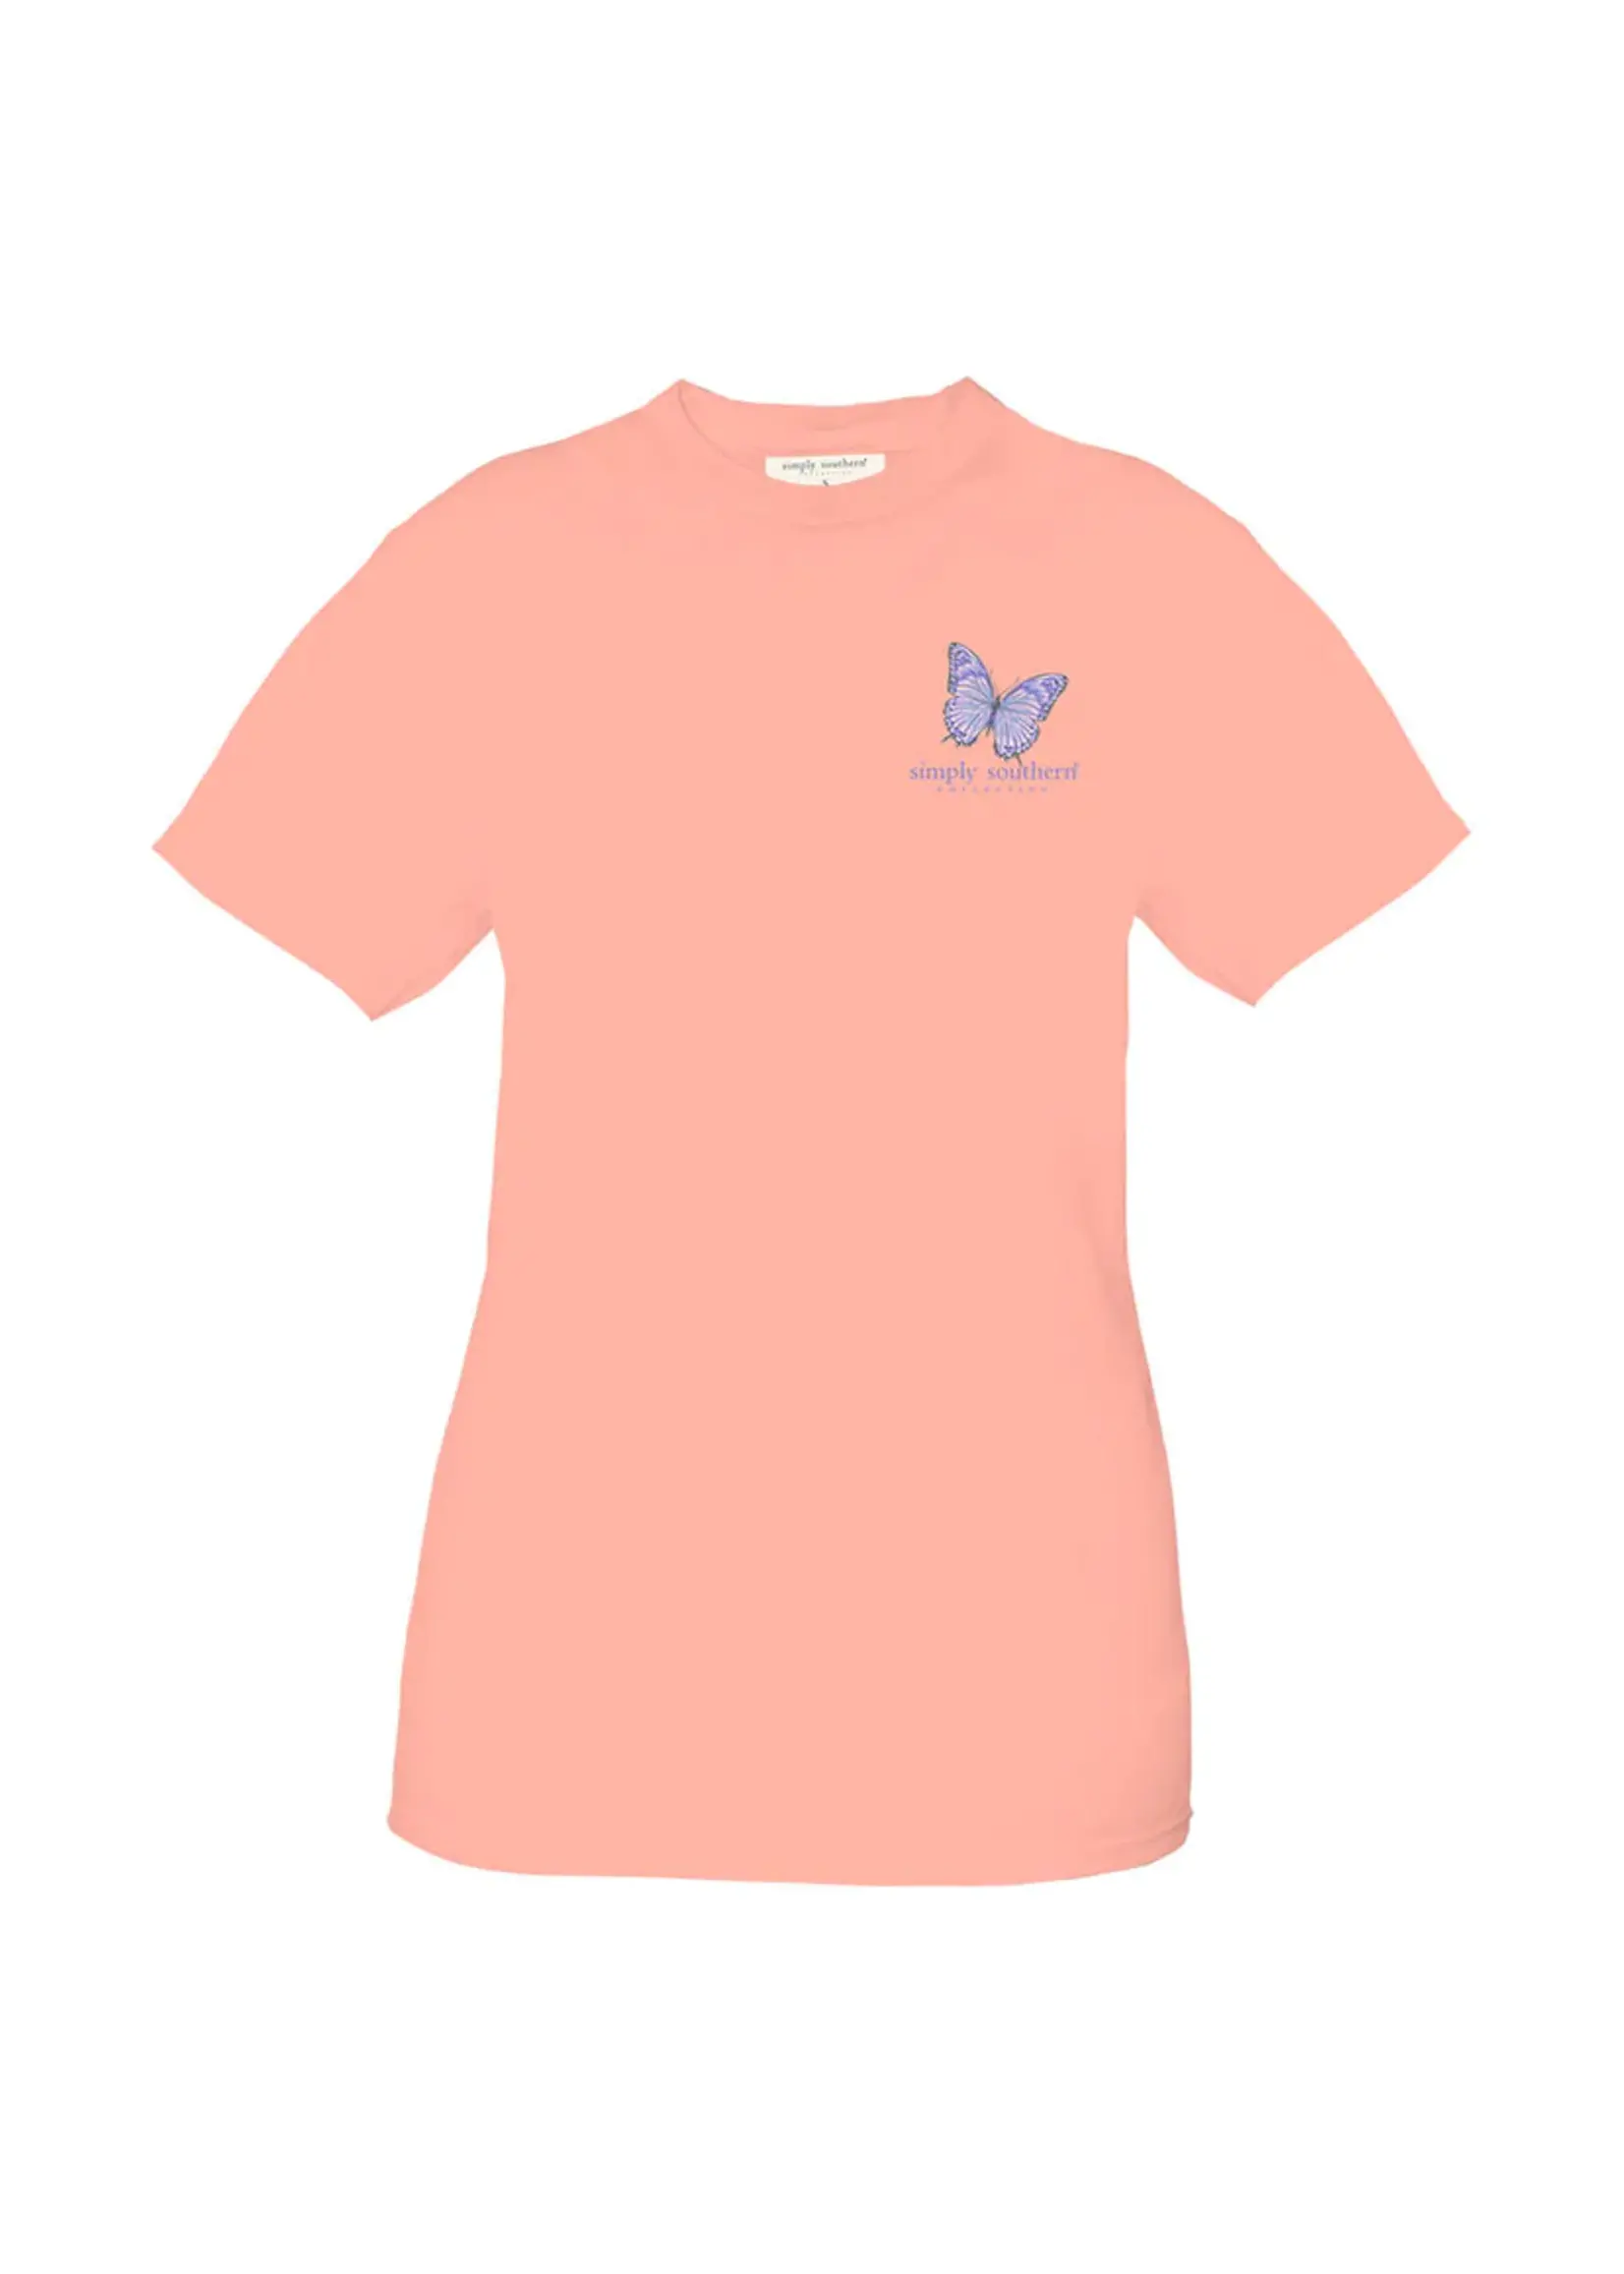 Simply Southern Collection Youth 'Under His Wing' SS T-Shirt